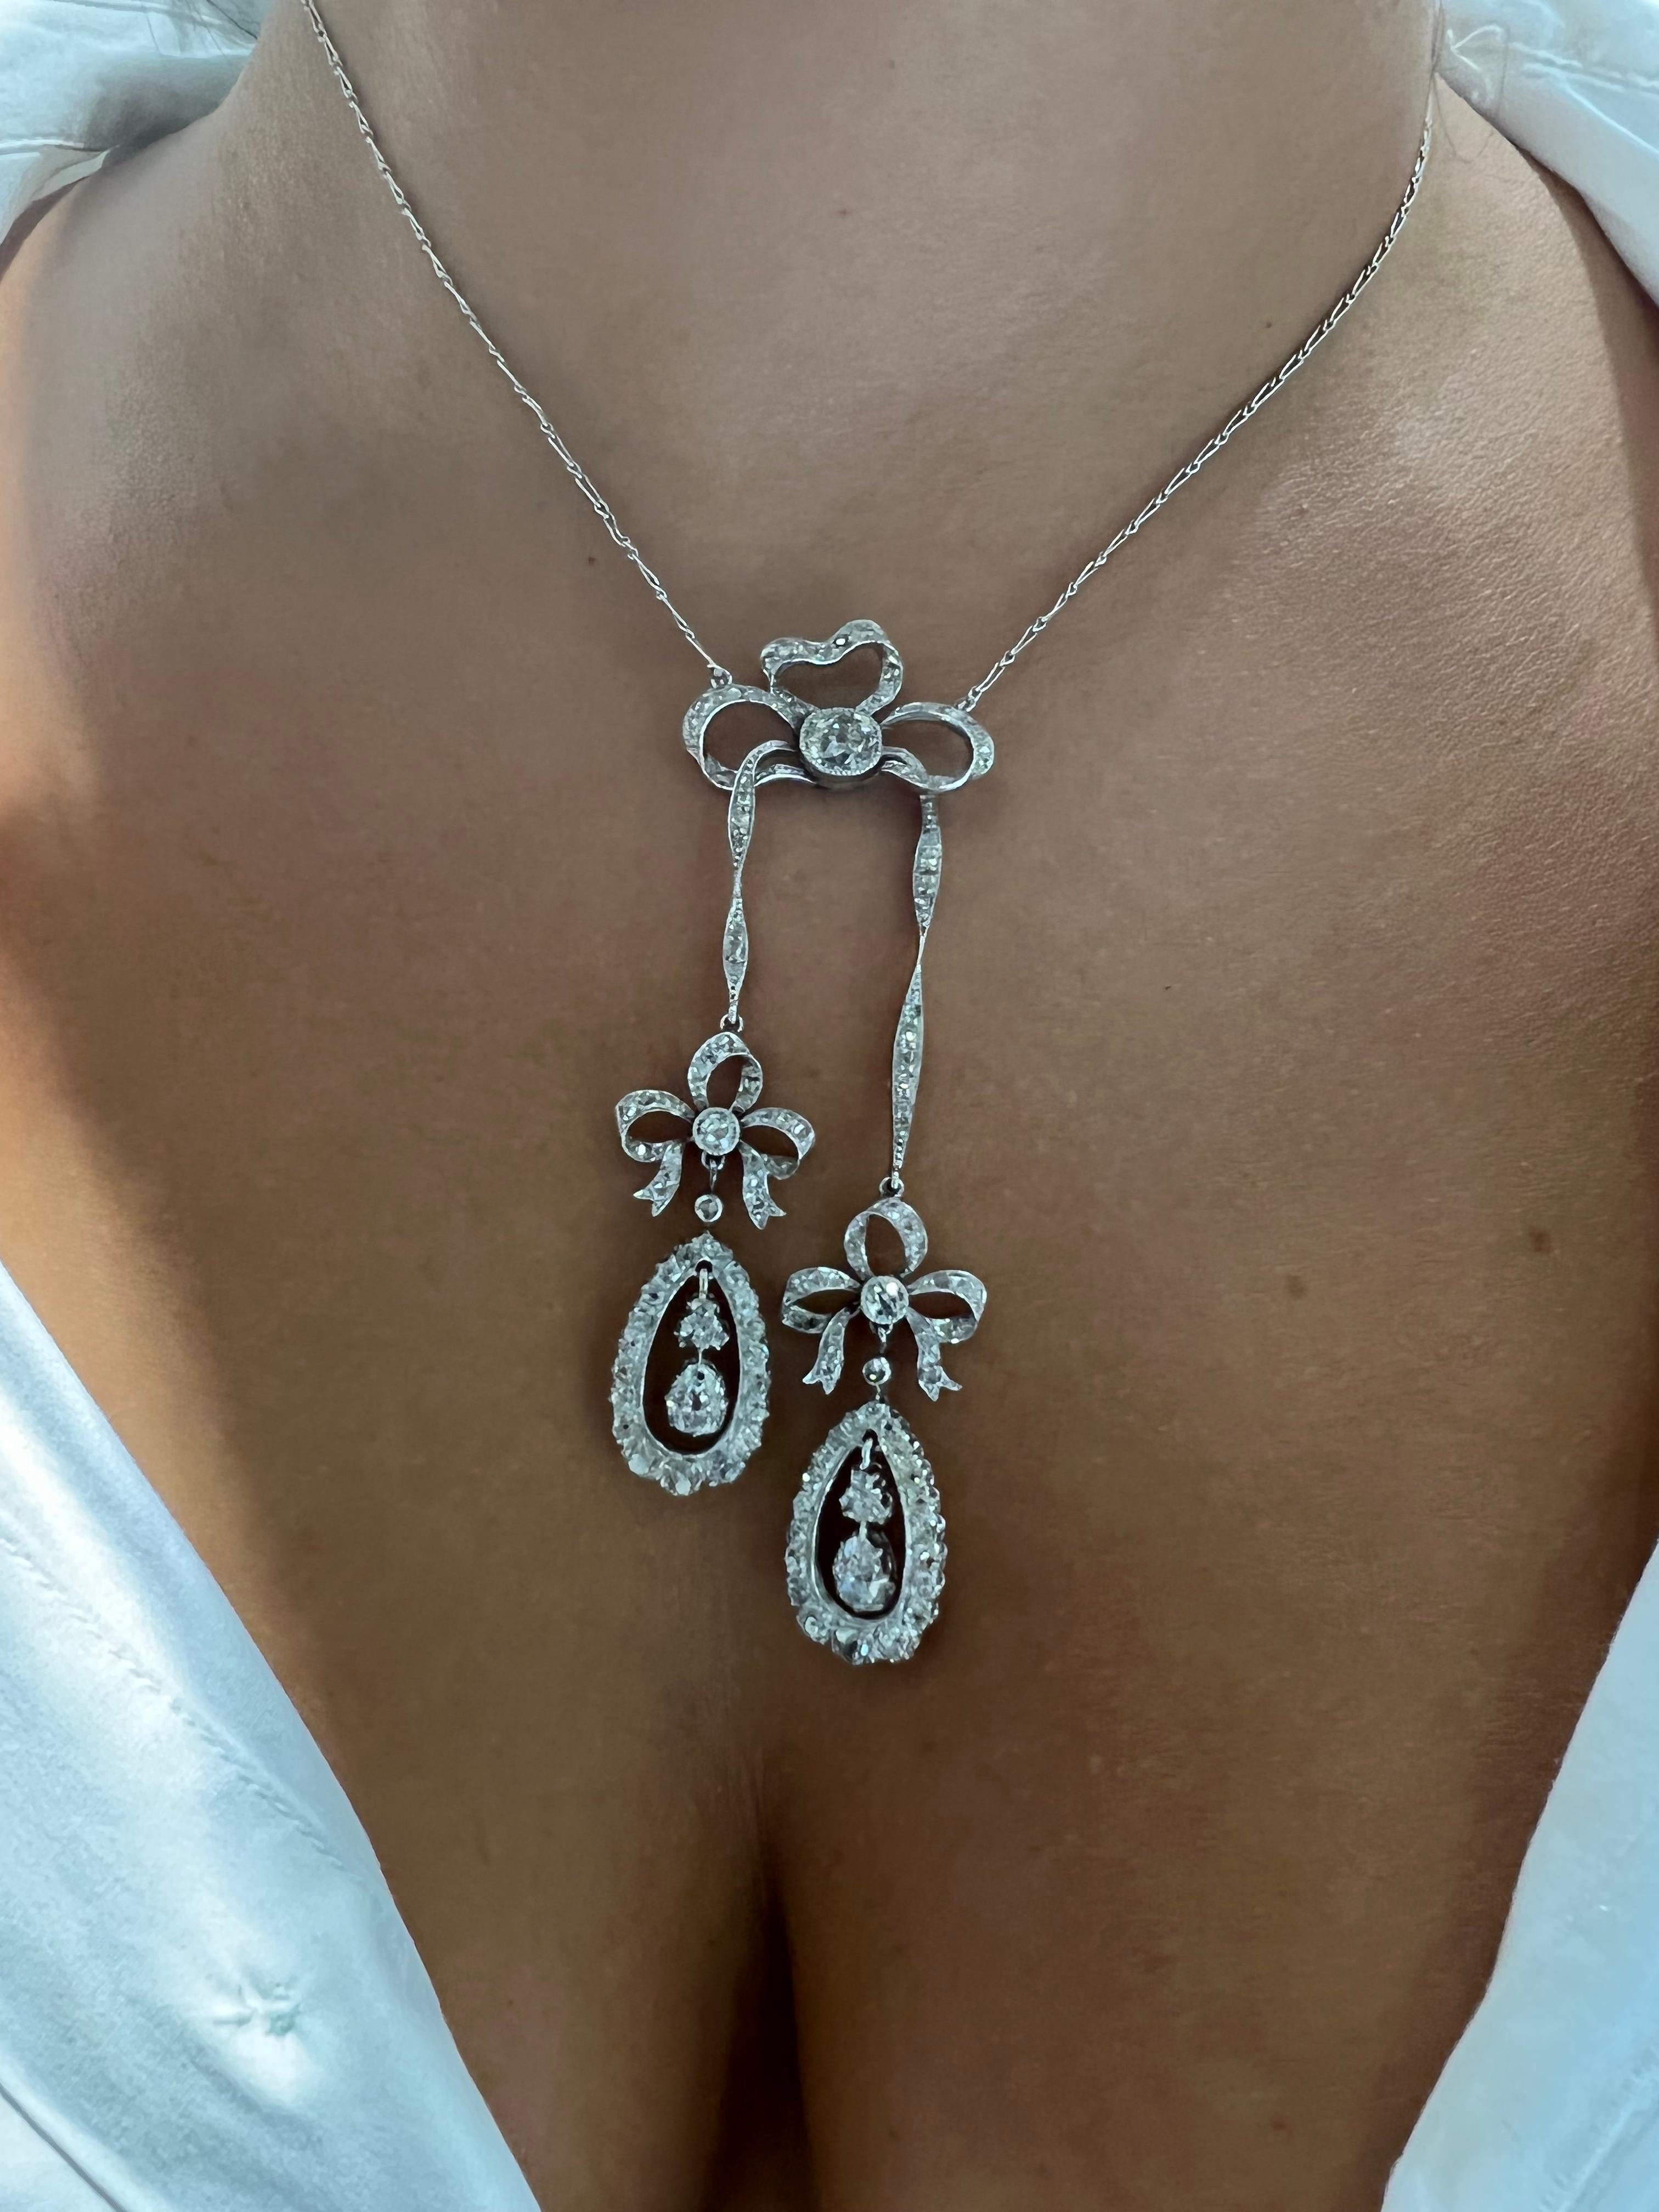 Negligé necklace in platinum, paved with approximately 10 carats of pear, round and old cut diamonds, on a thin chain. 
The pattern in the center is fix and set with an old cut cushion diamond. The rest of the necklace is totally flexible, and the